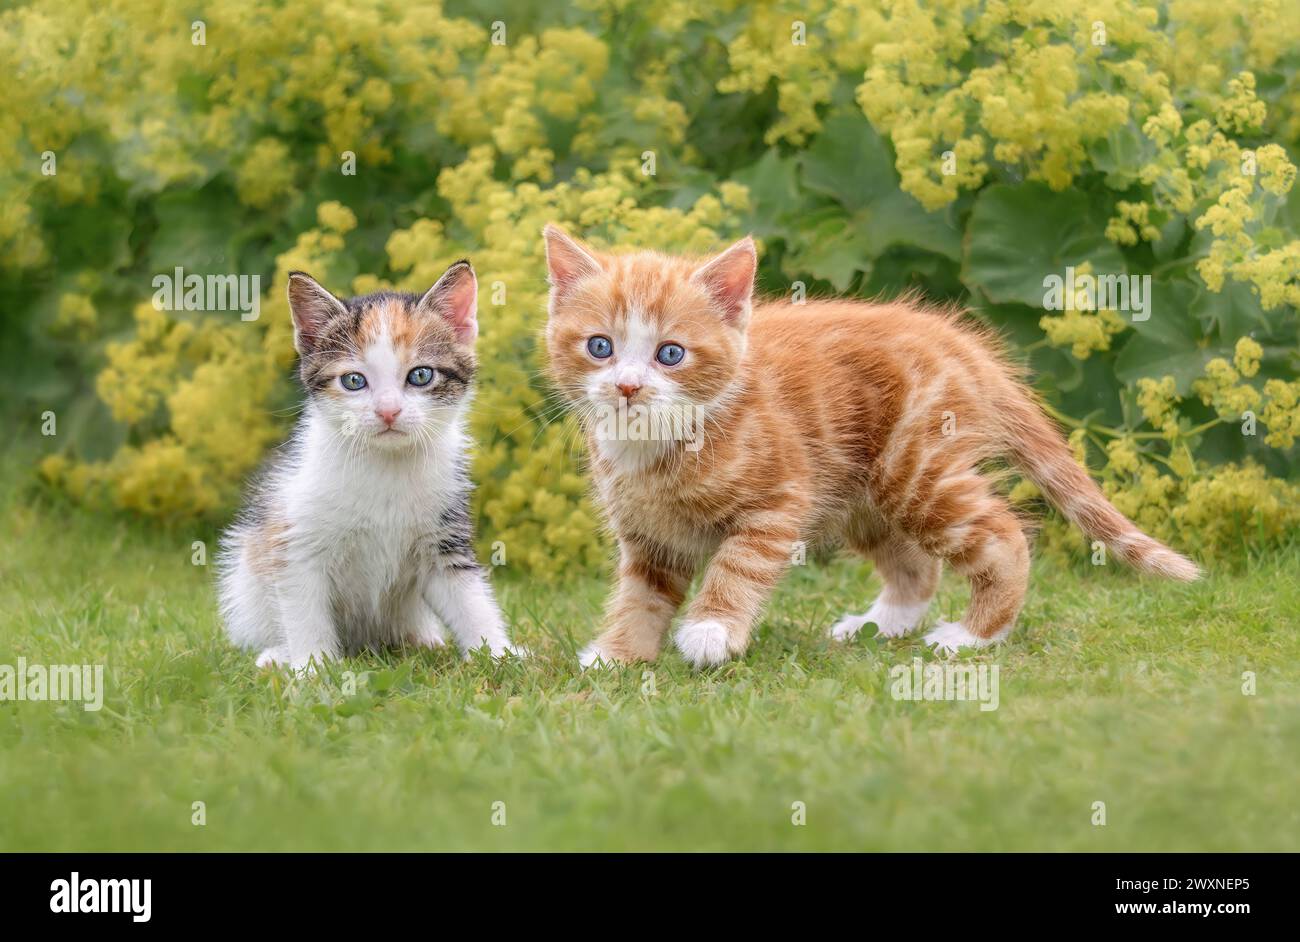 Two cute baby cat kittens with blue eyes, a pair of siblings, posing side by side on green grass and looking curiously in a flowery garden Stock Photo